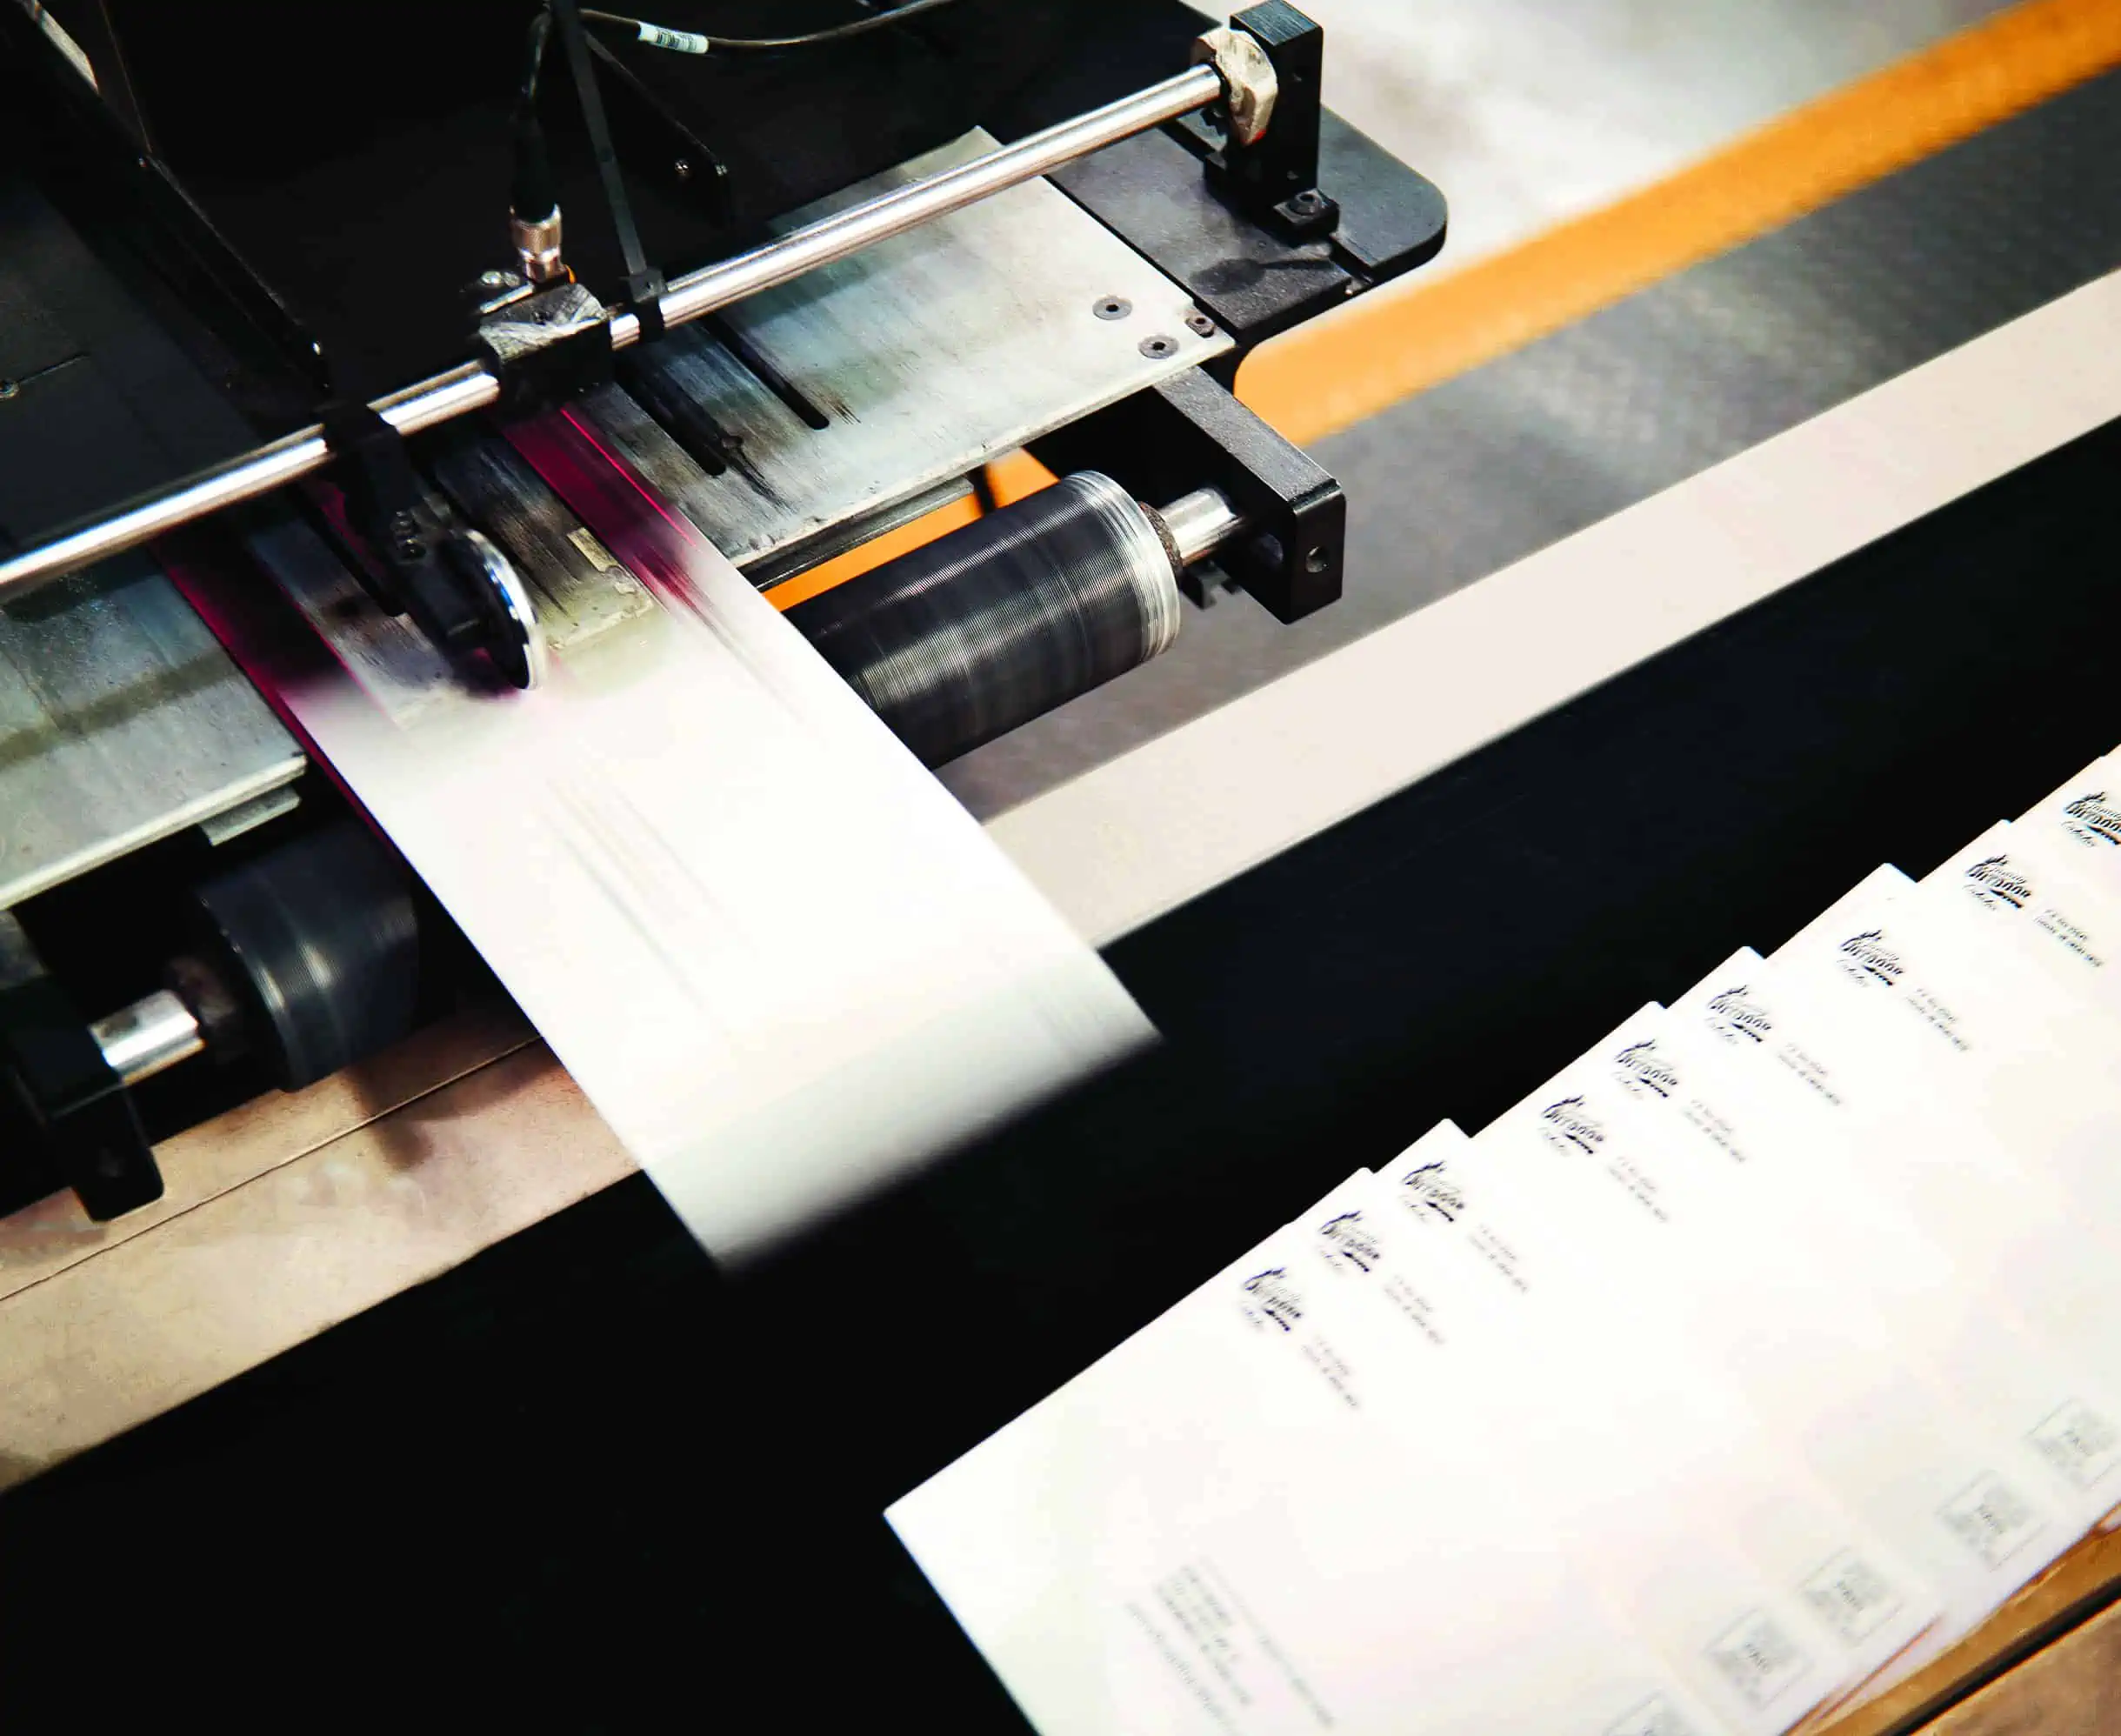 Mail being printed out